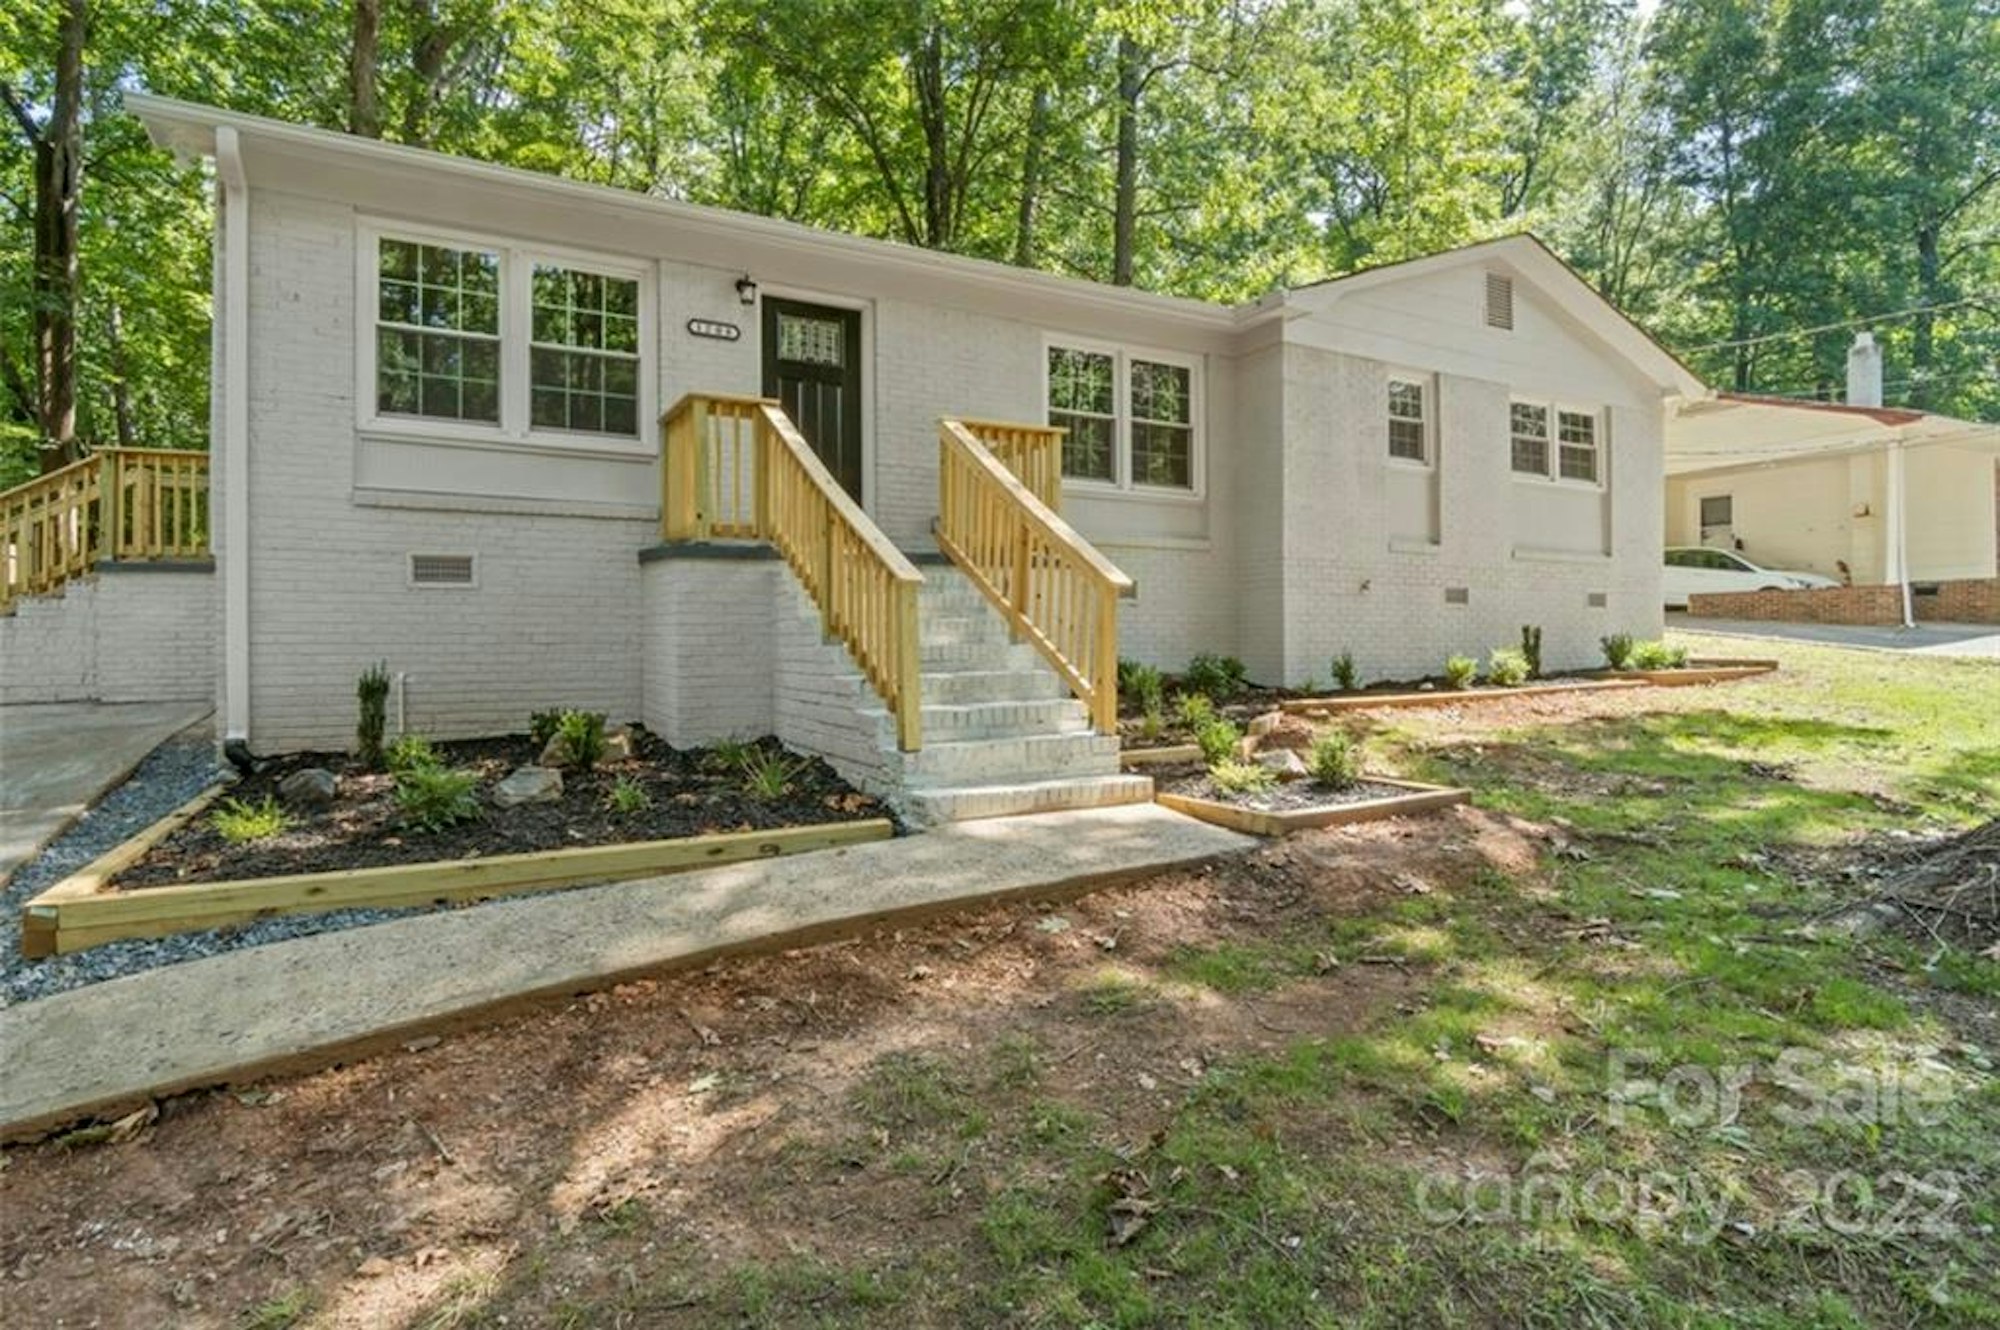 Photo 1 of 32 - 1208 Northwoods Dr, Kings Mountain, NC 28086